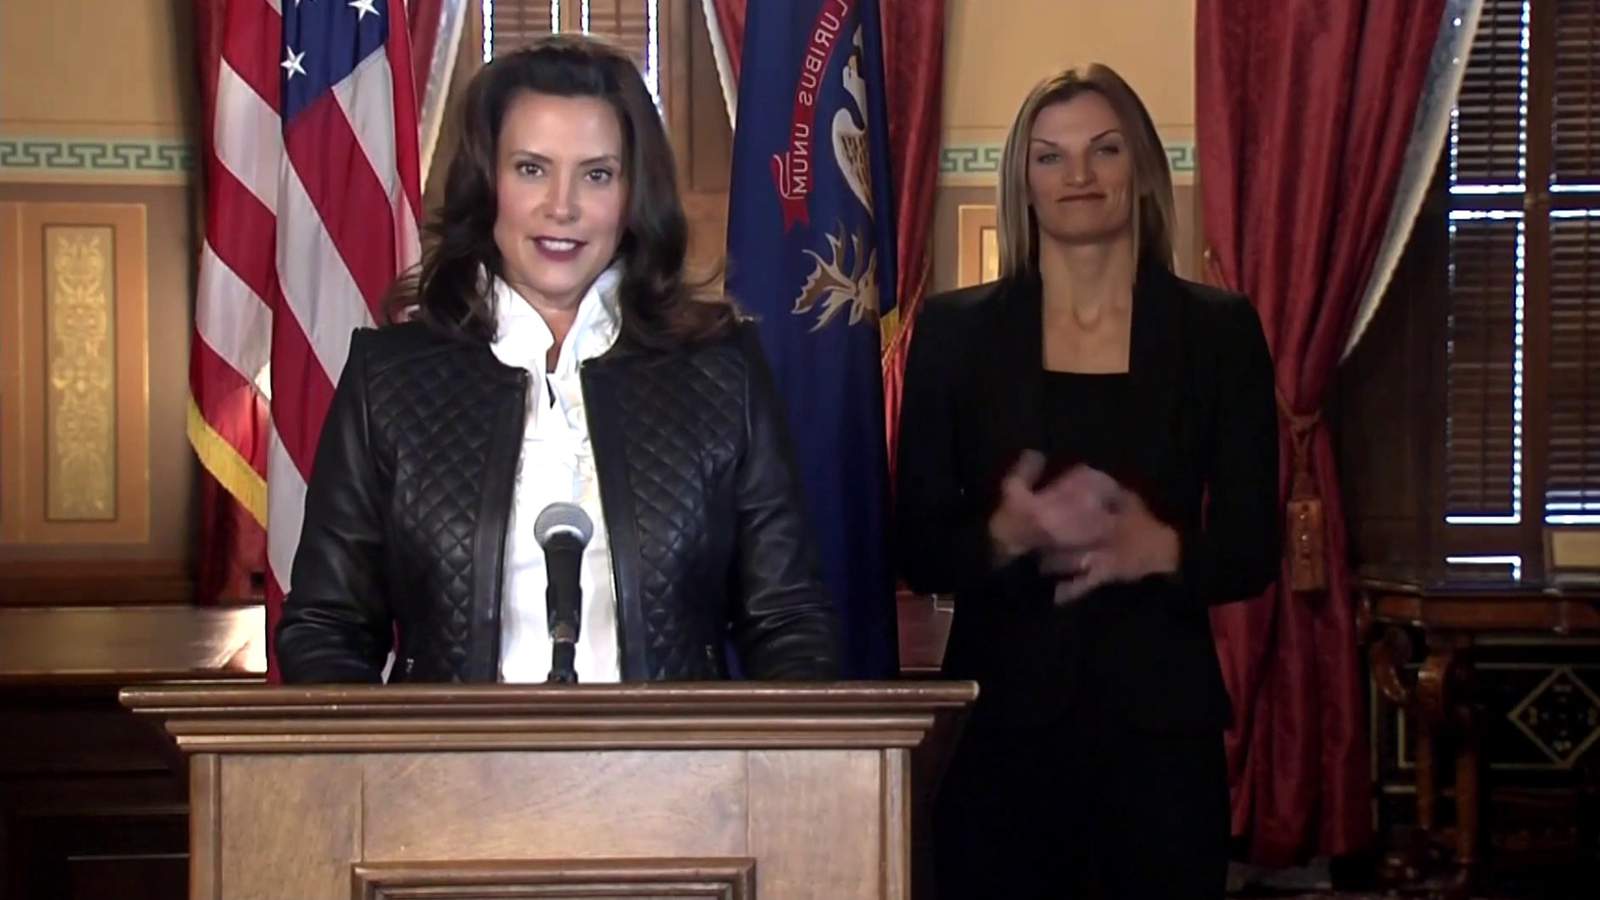 Here’s what Gov. Whitmer said about group of Michiganders' plot to kidnap her